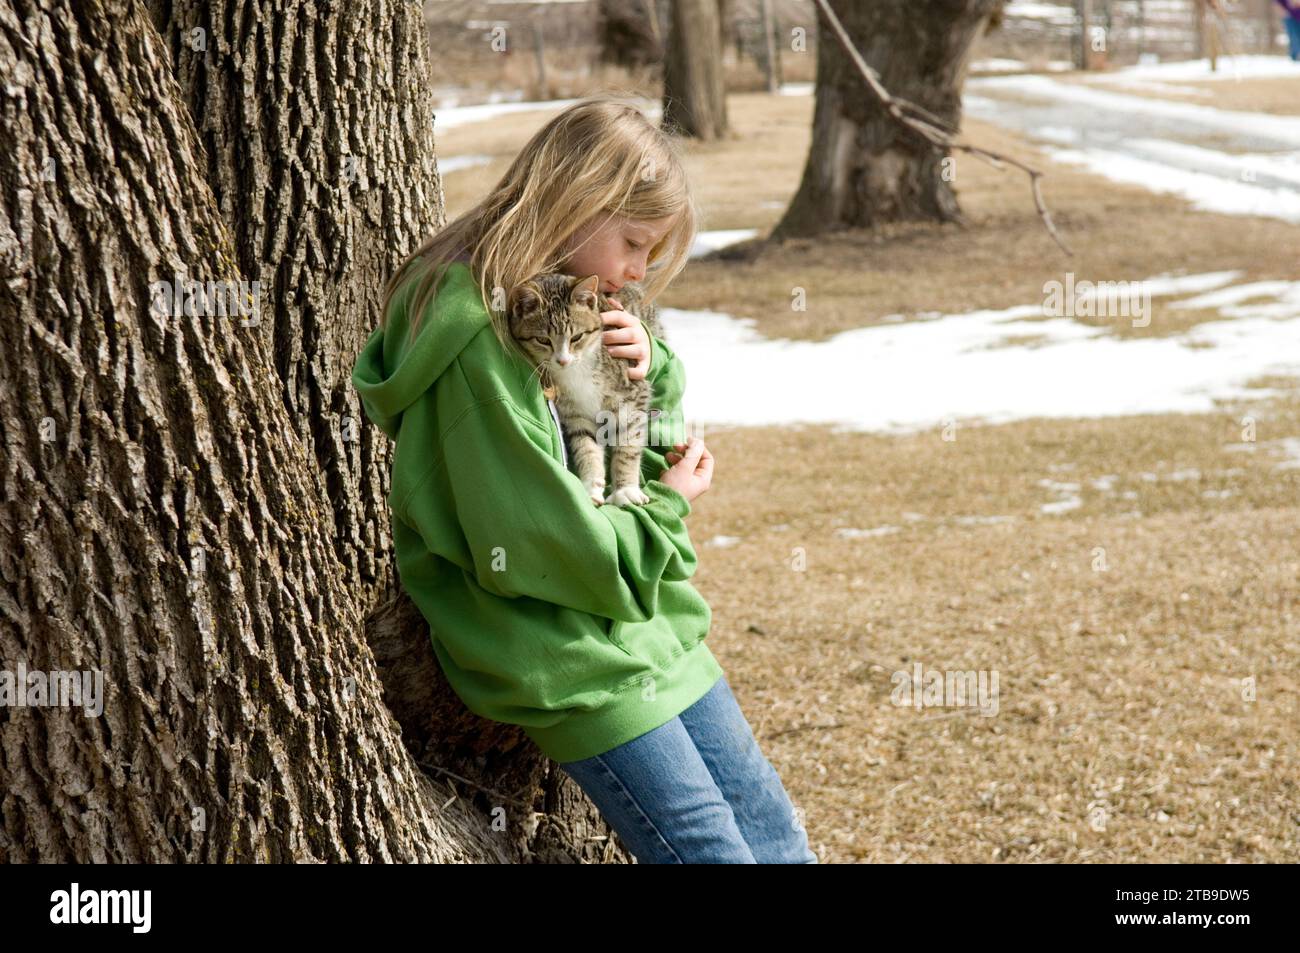 Girl stands outside and leans against a large tree as she shows affection to her pet cat; Otoe, Nebraska, United States of America Stock Photo